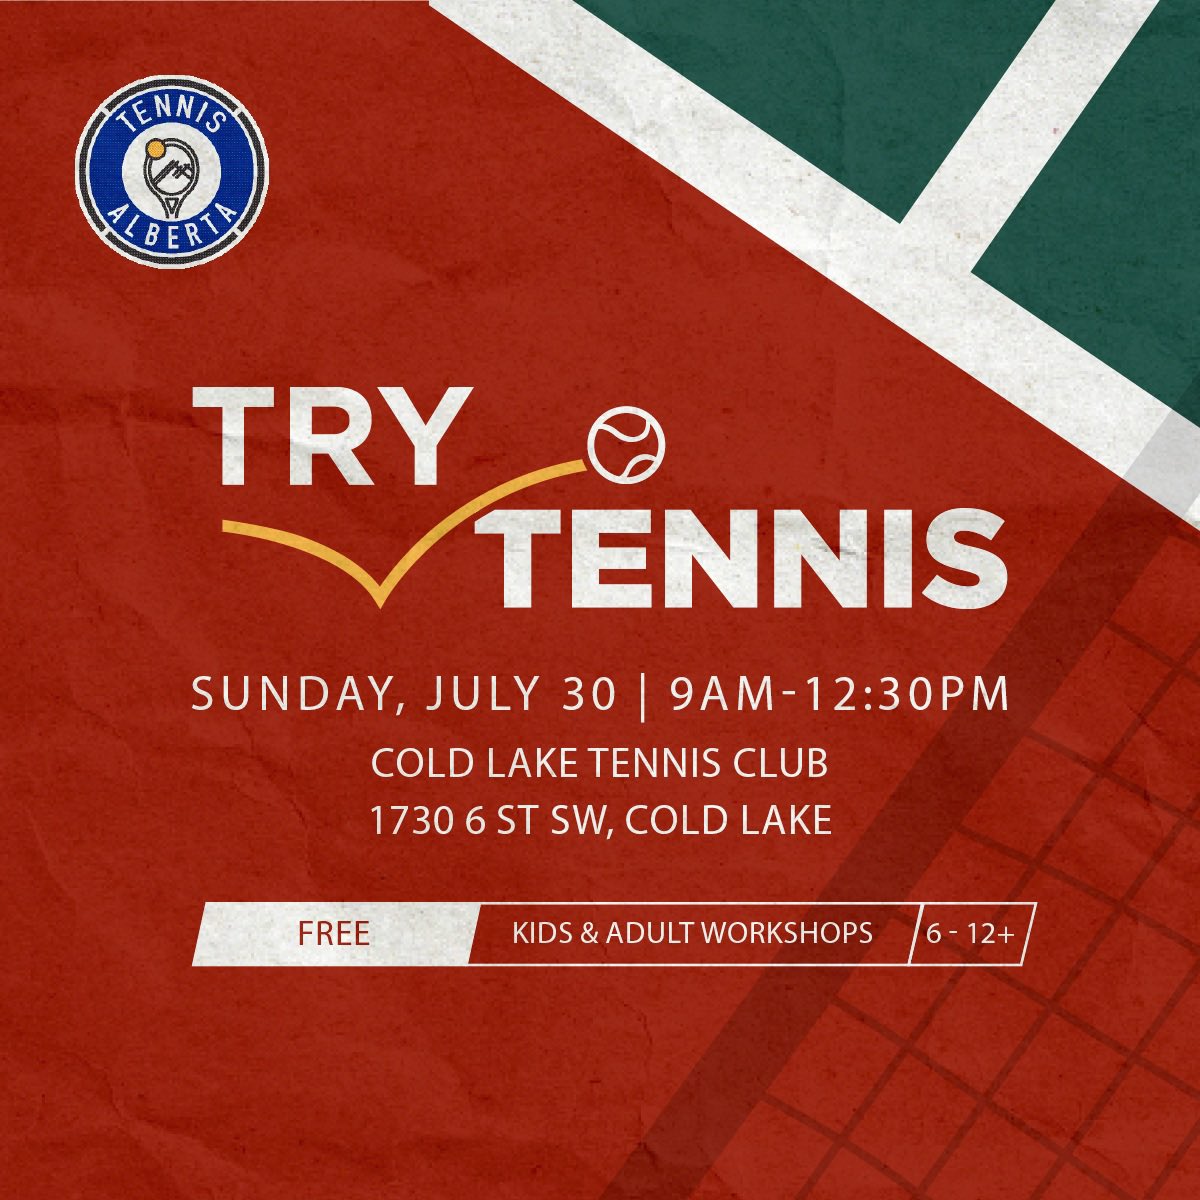 #coldlakealberta Try Tennis for FREE with Tennis Alberta and Cold Lake Tennis Club. 

tennisalberta.com/communities/tr…

#trytennis